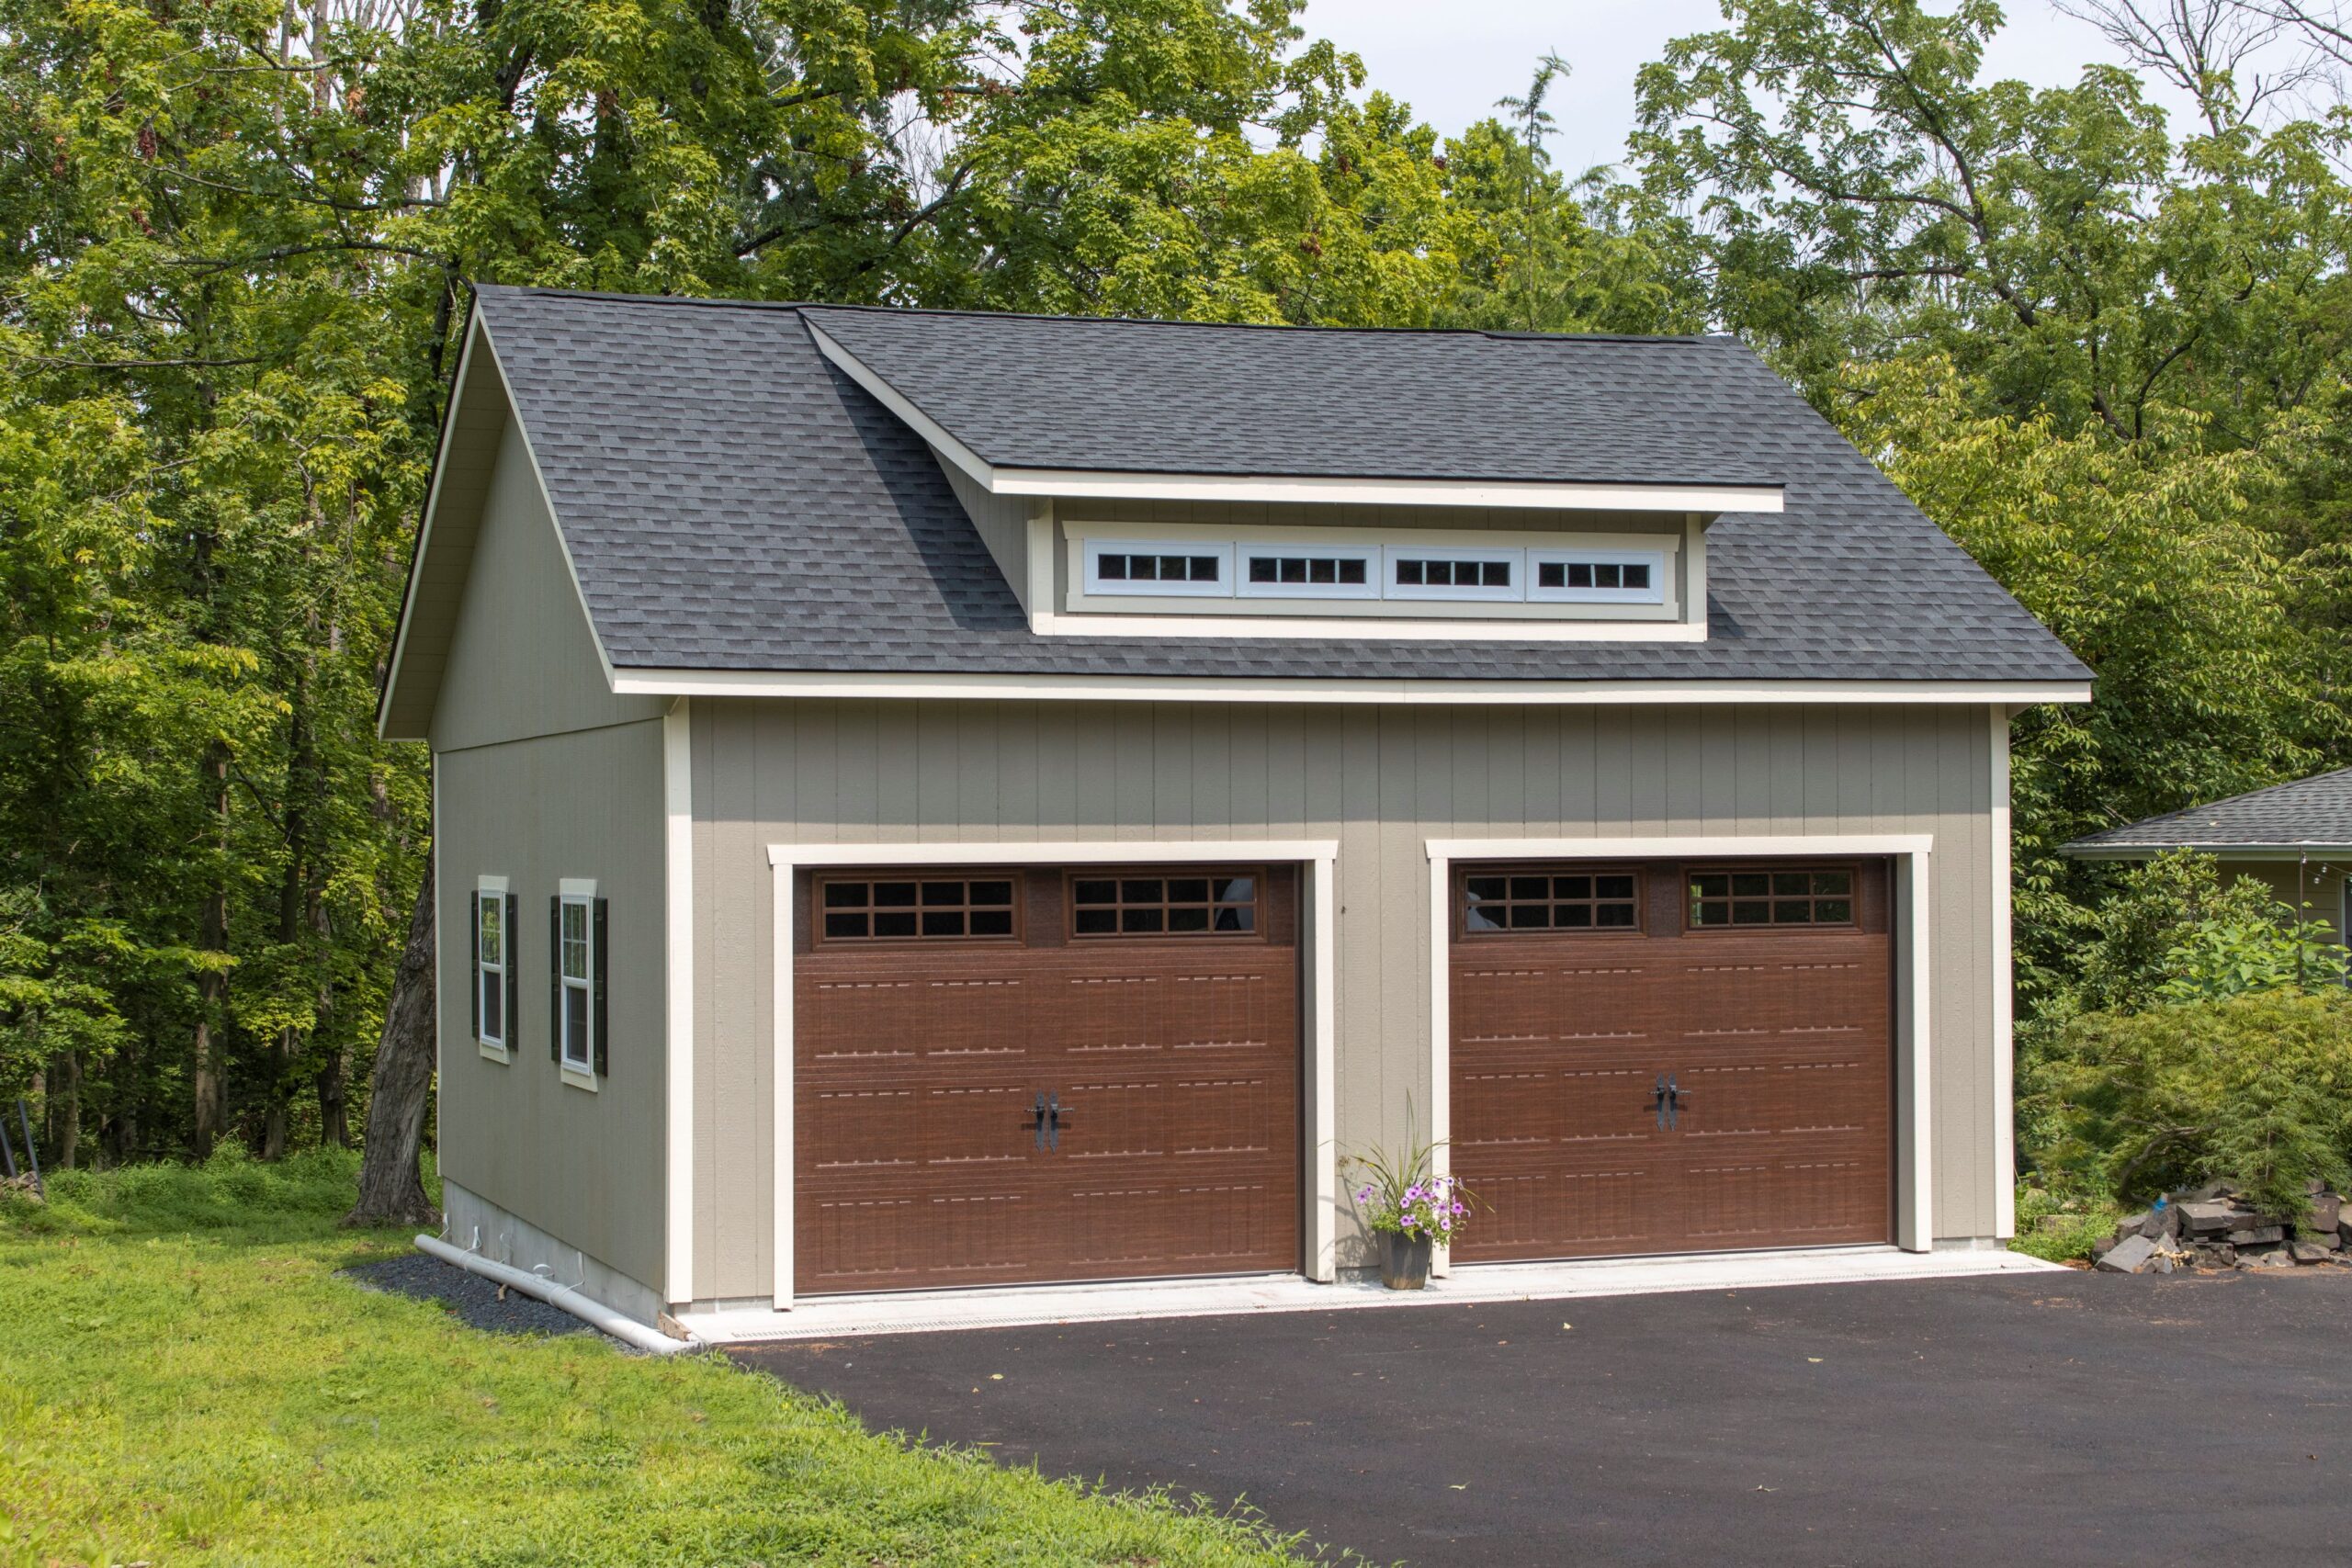 Exterior of a 2-story, 2-car Garden Shed Garage with gray siding and brown garage doors.